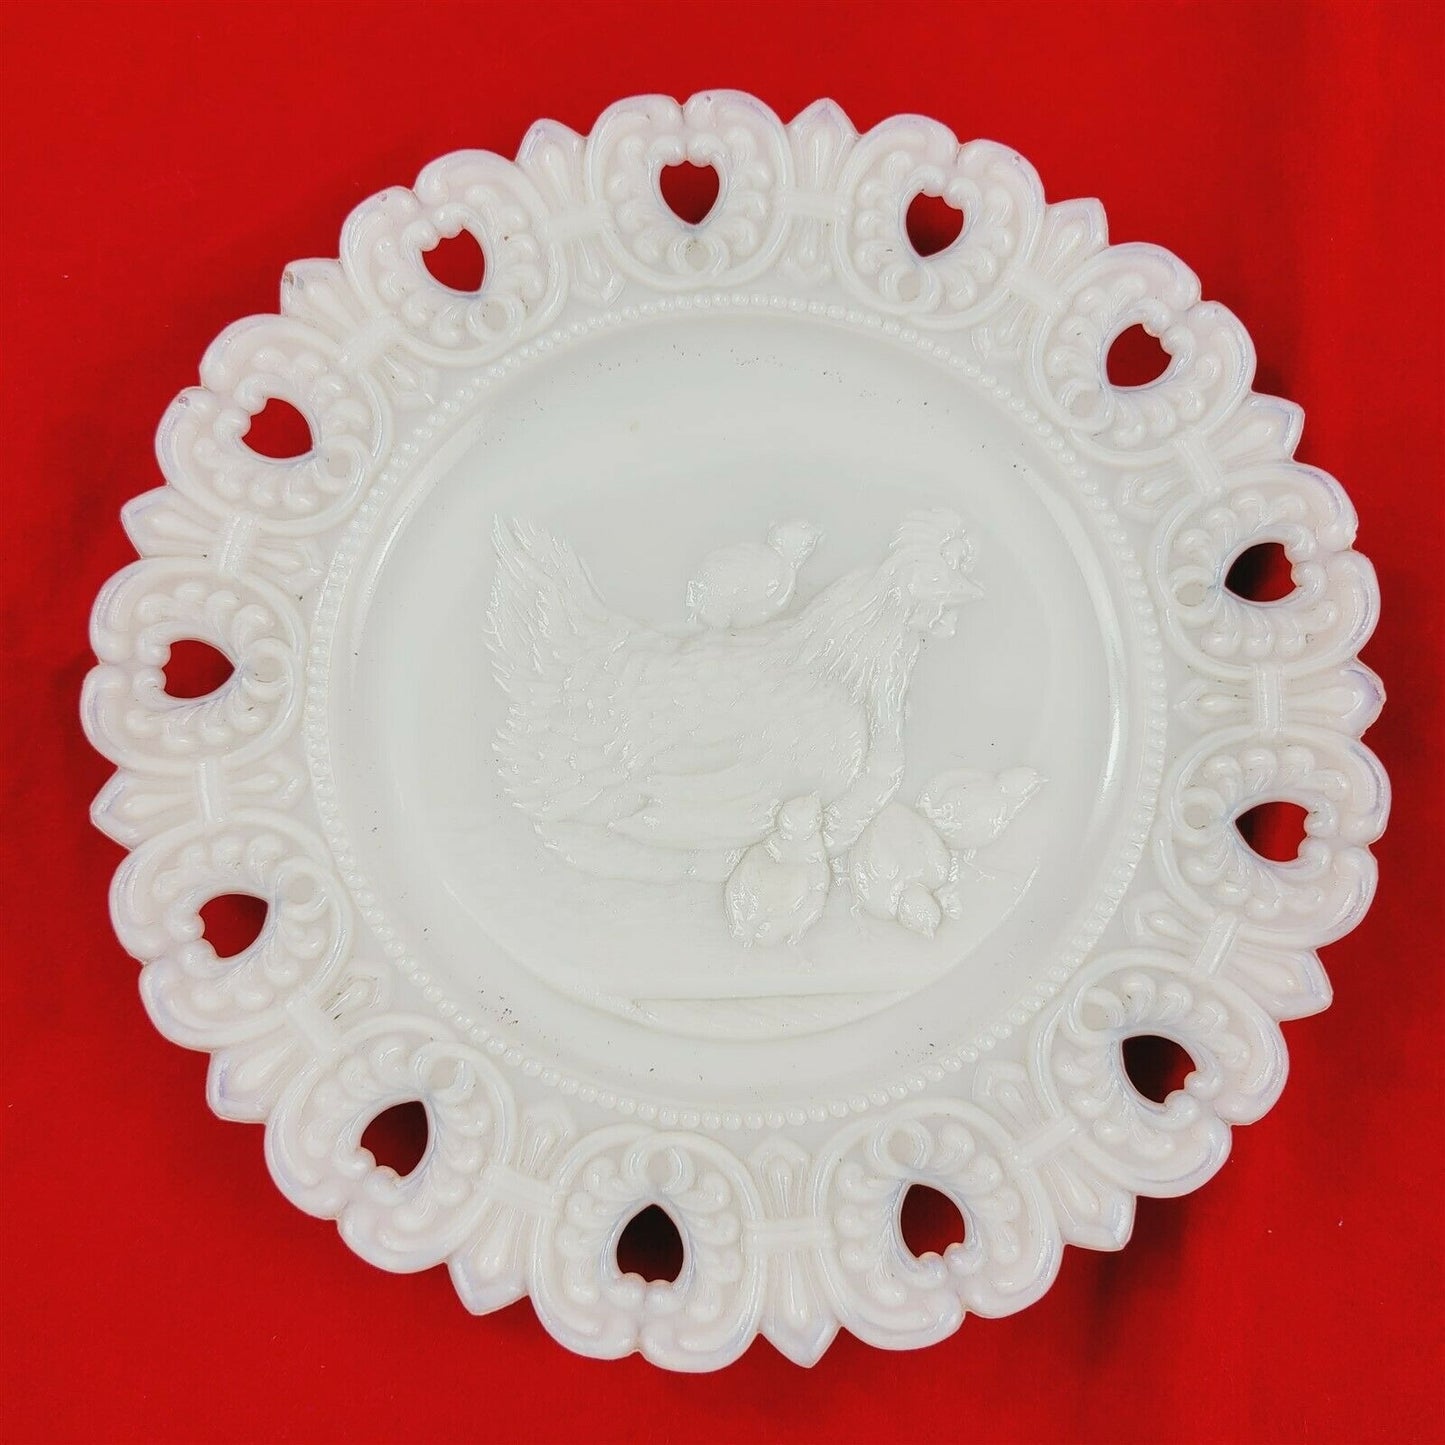 2 Vintage Milk Glass Plates Embossed Waterfall Scenery & Hen with Chicks Chicken